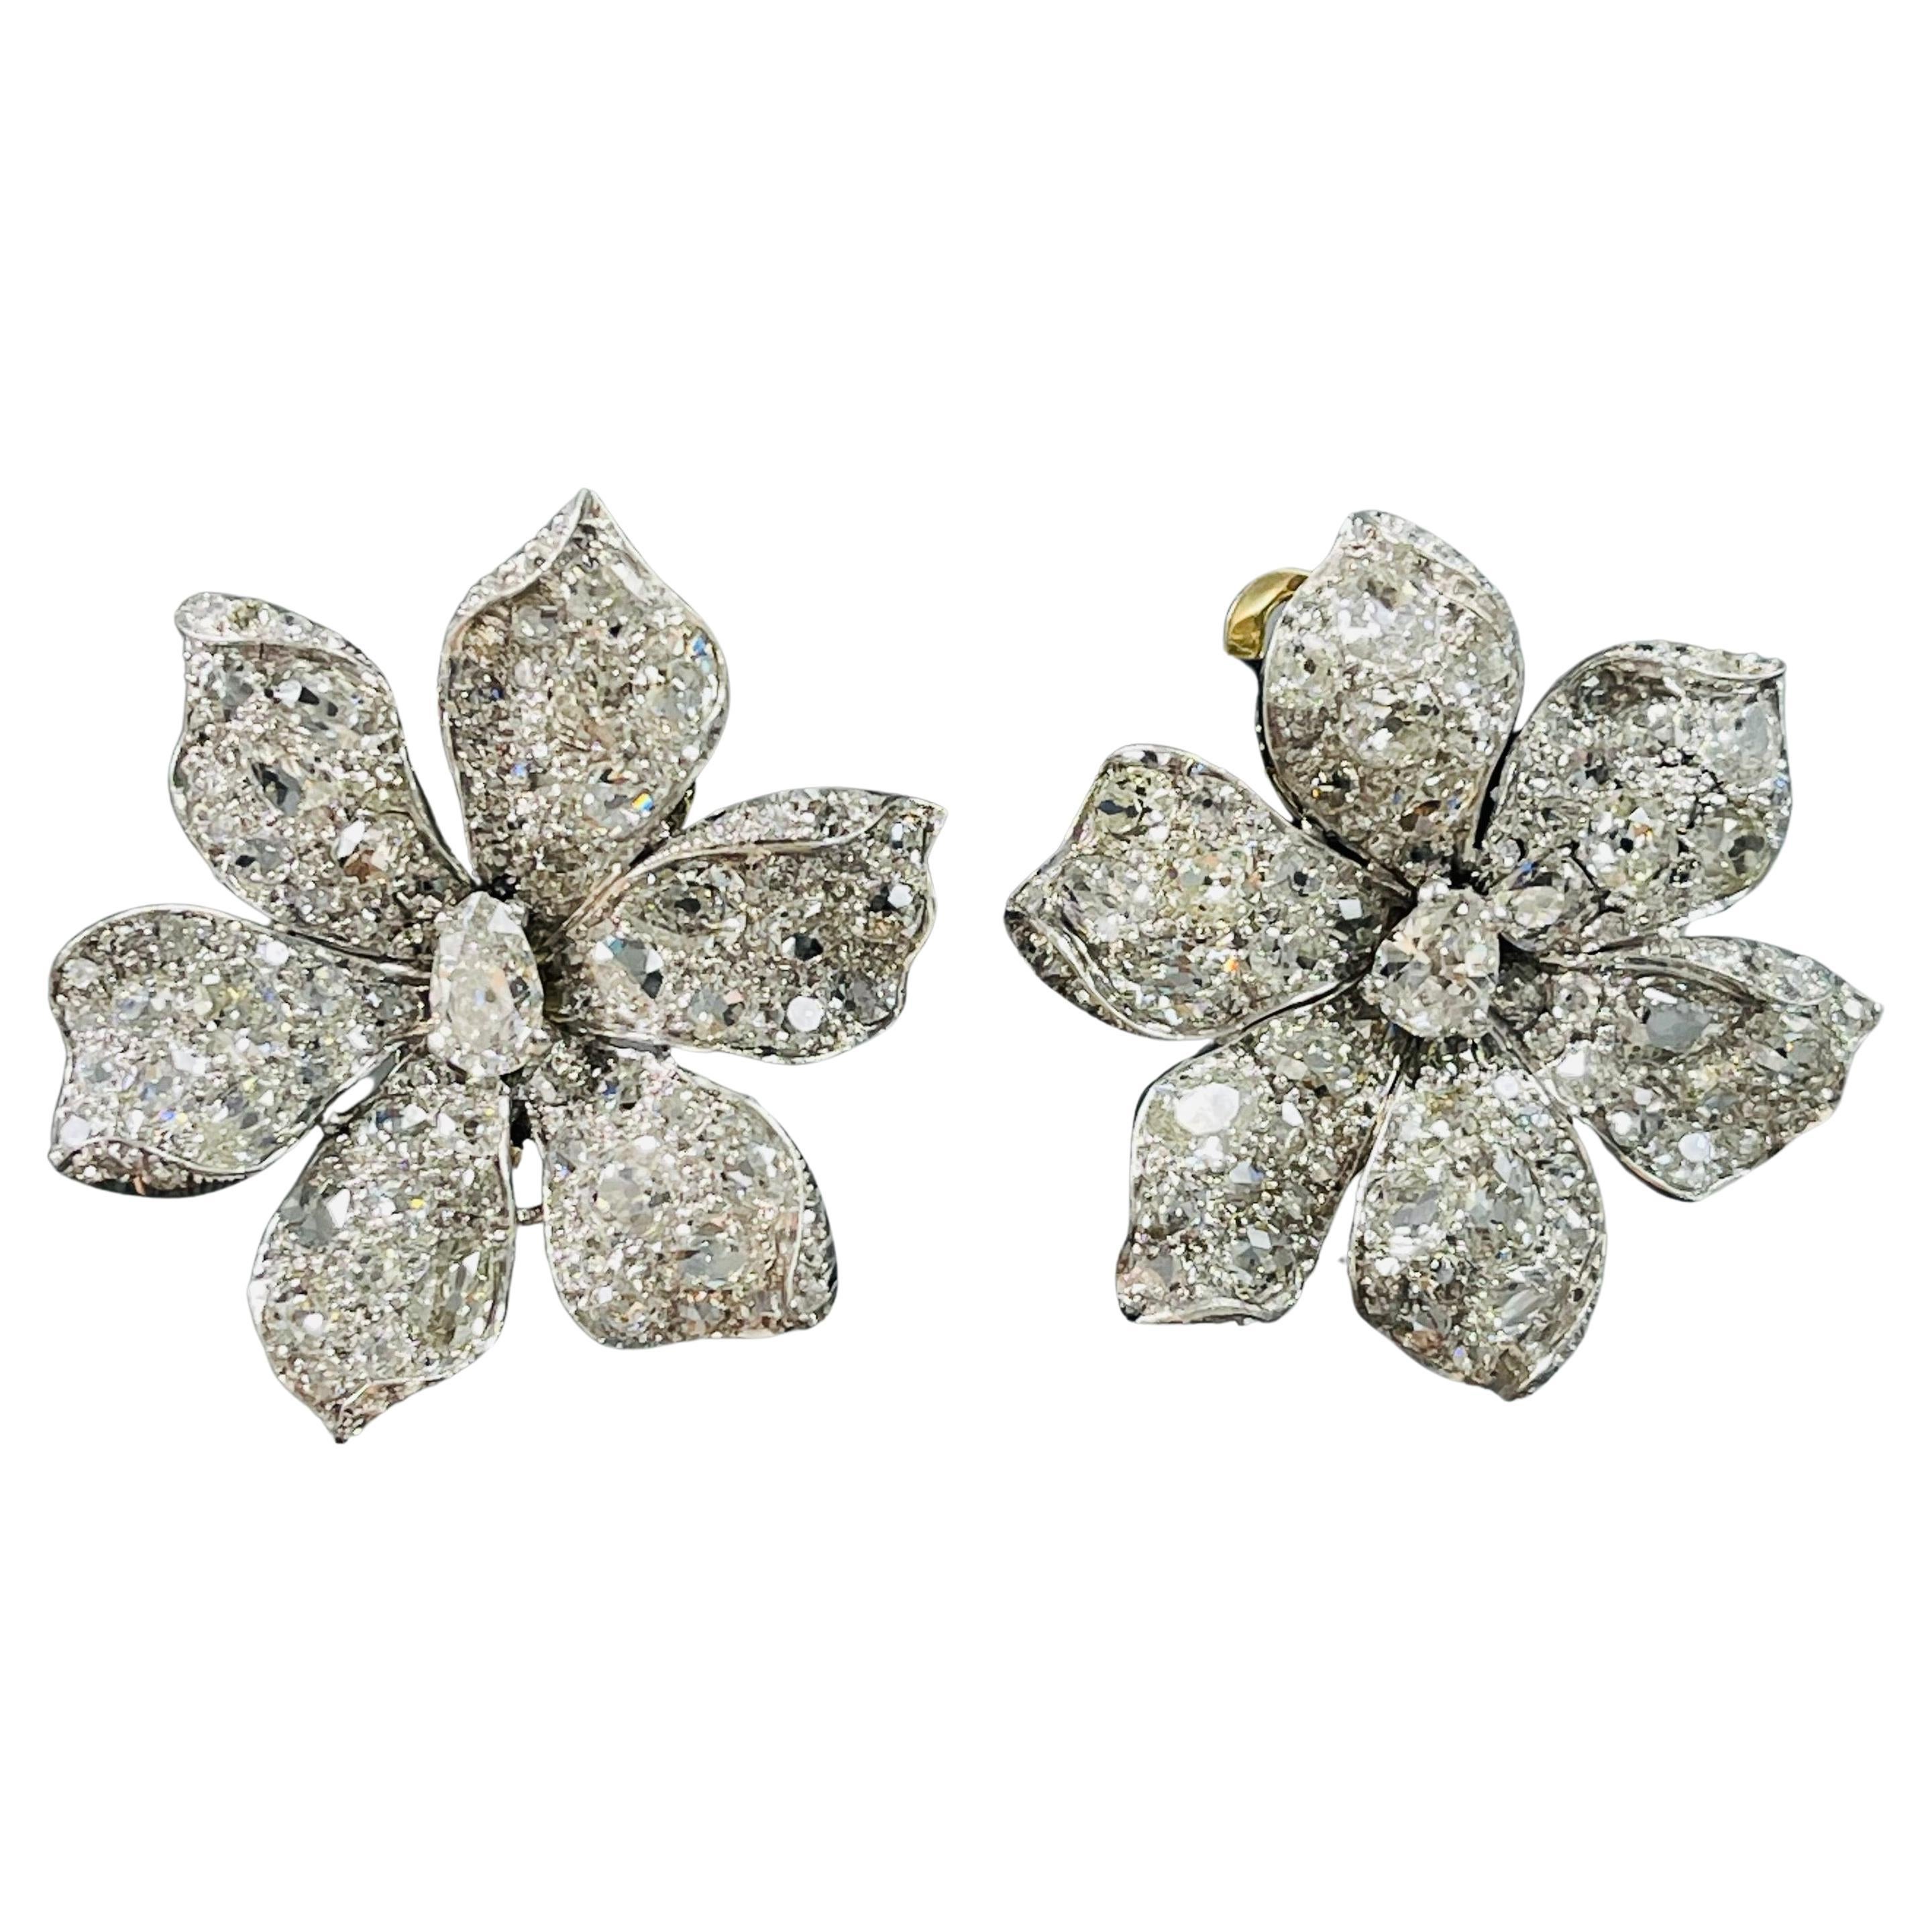 Magnificently designed as a flower set with 30 carats of old cut diamond ear clips in Platinum. 

The details are as follows ; 
Diamond weight : 30 Carats with G color and VS clarity
Metal : Platinum 
Measurements : 2 inches by 1 3/4 inches 

